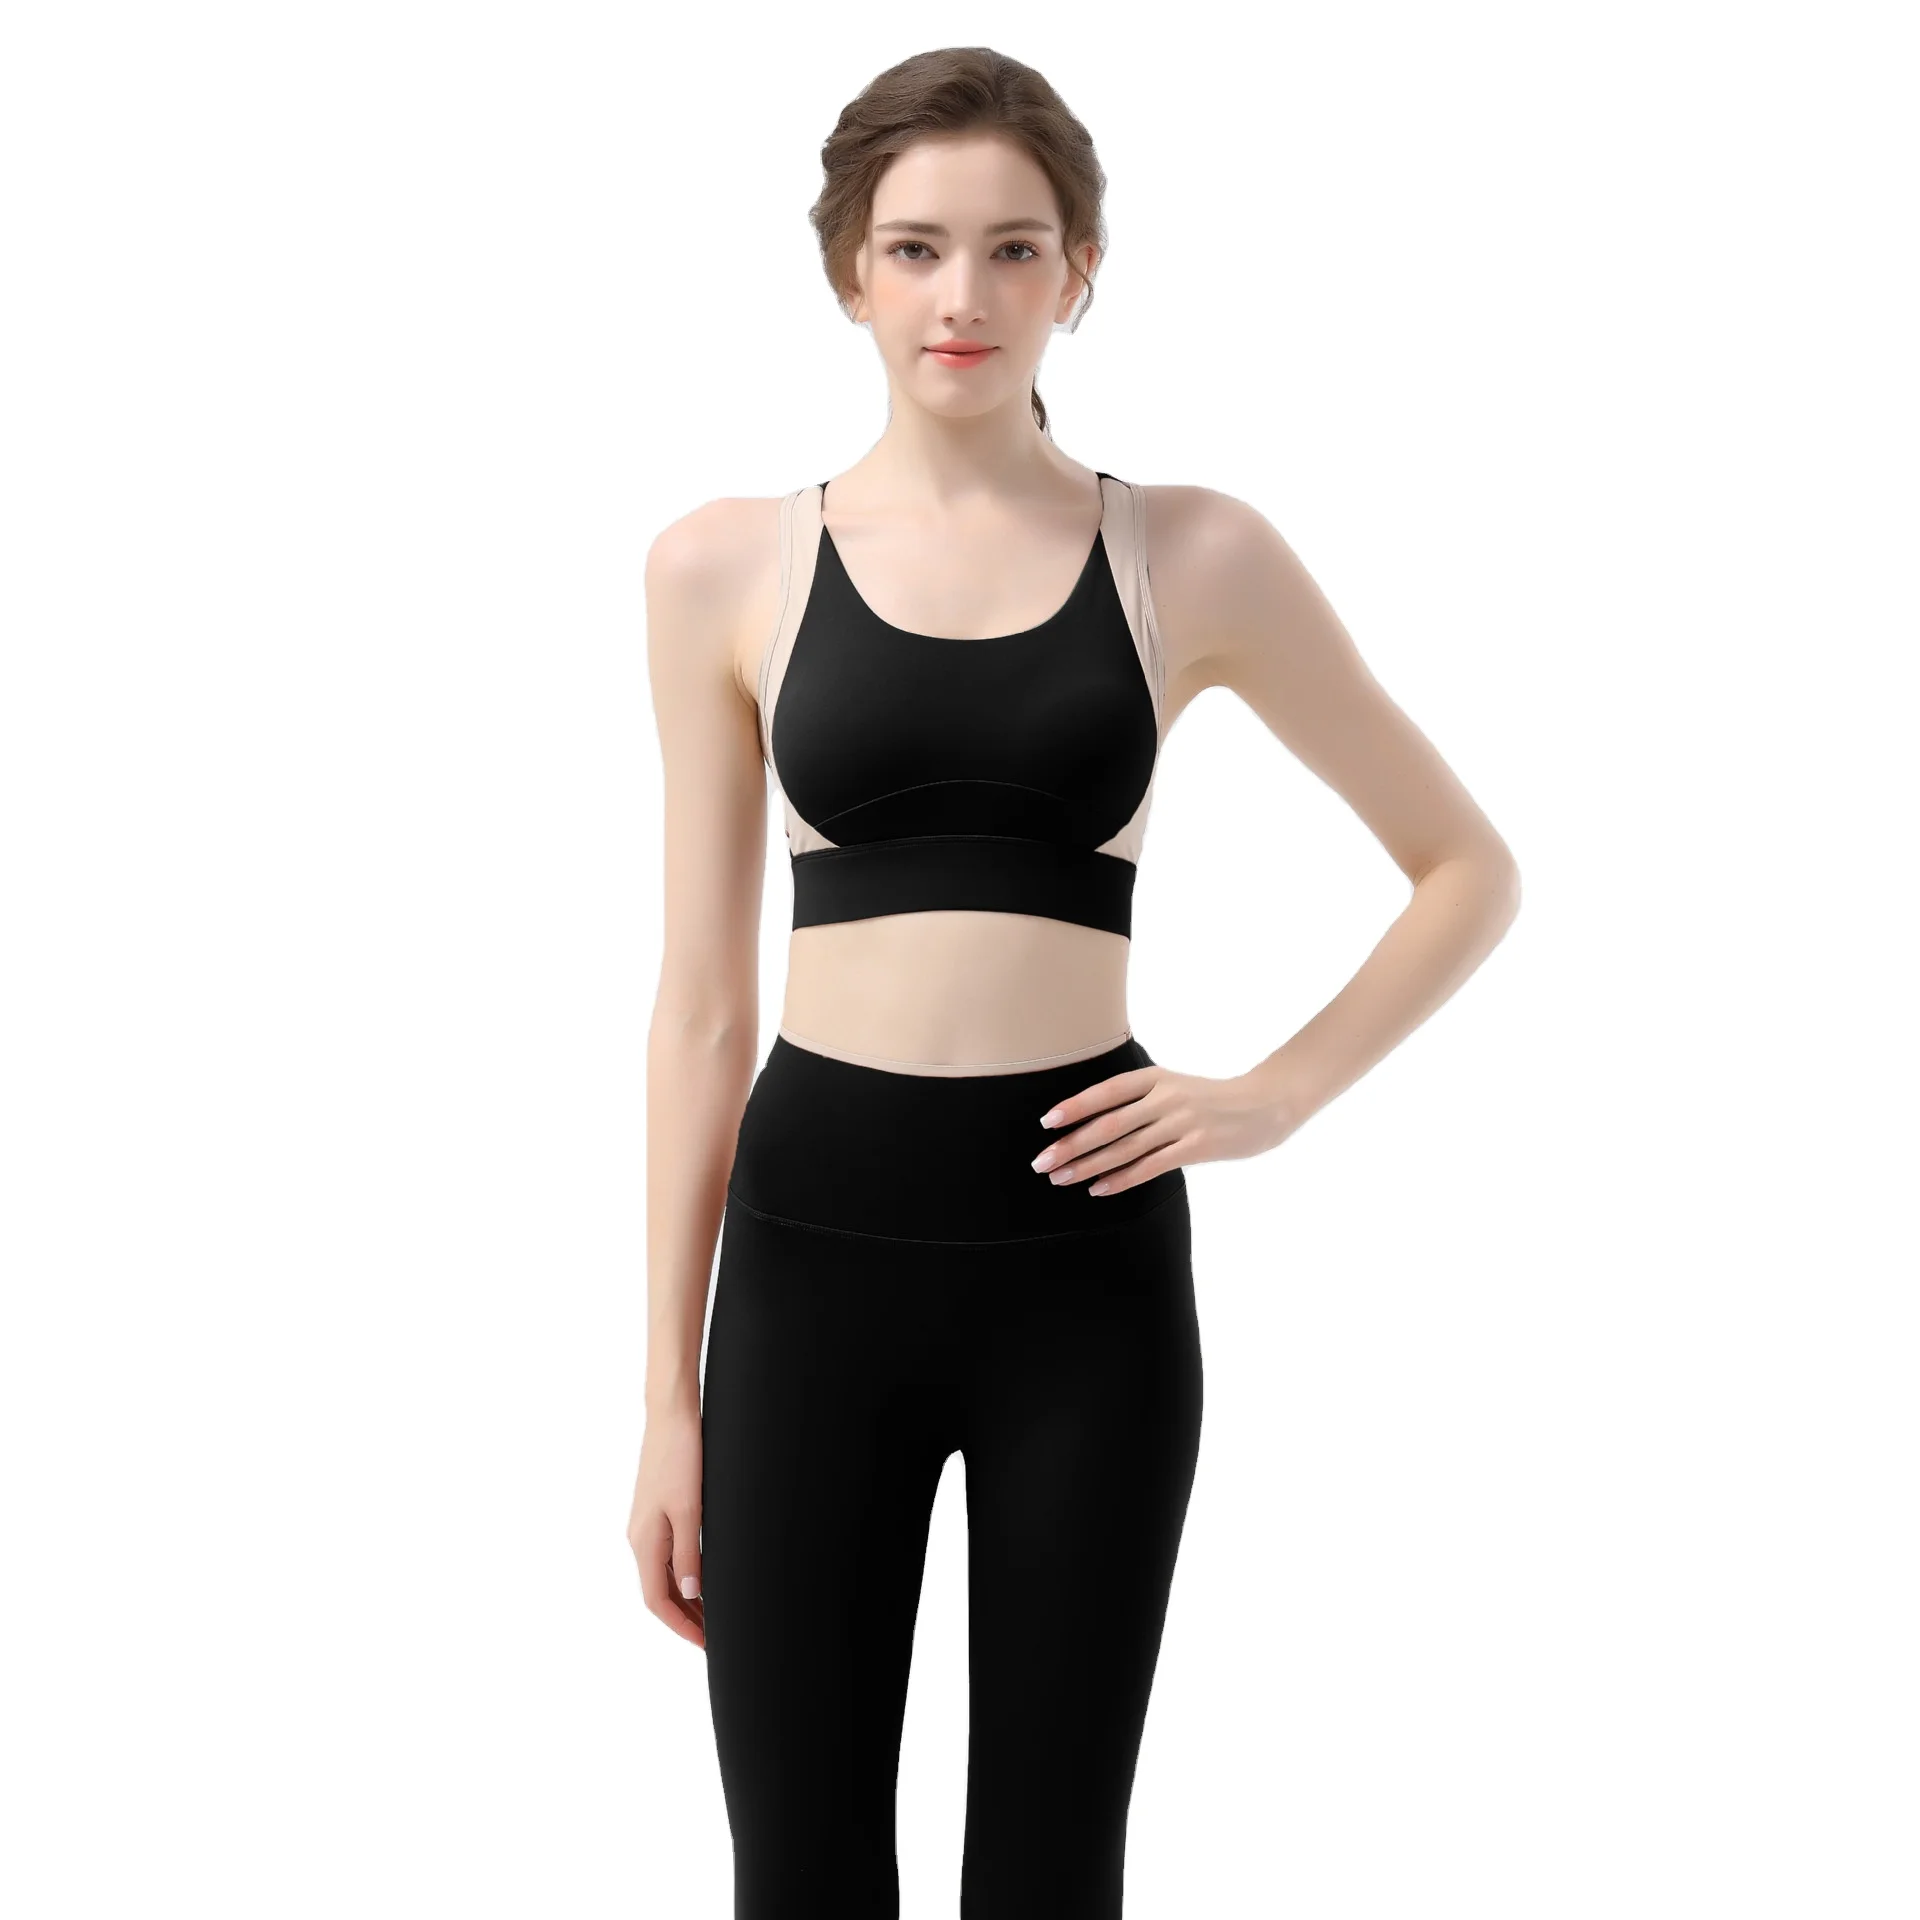 Yoga clothing suit women's sports underwear fitness new high-strength non-marking shockproof gathering